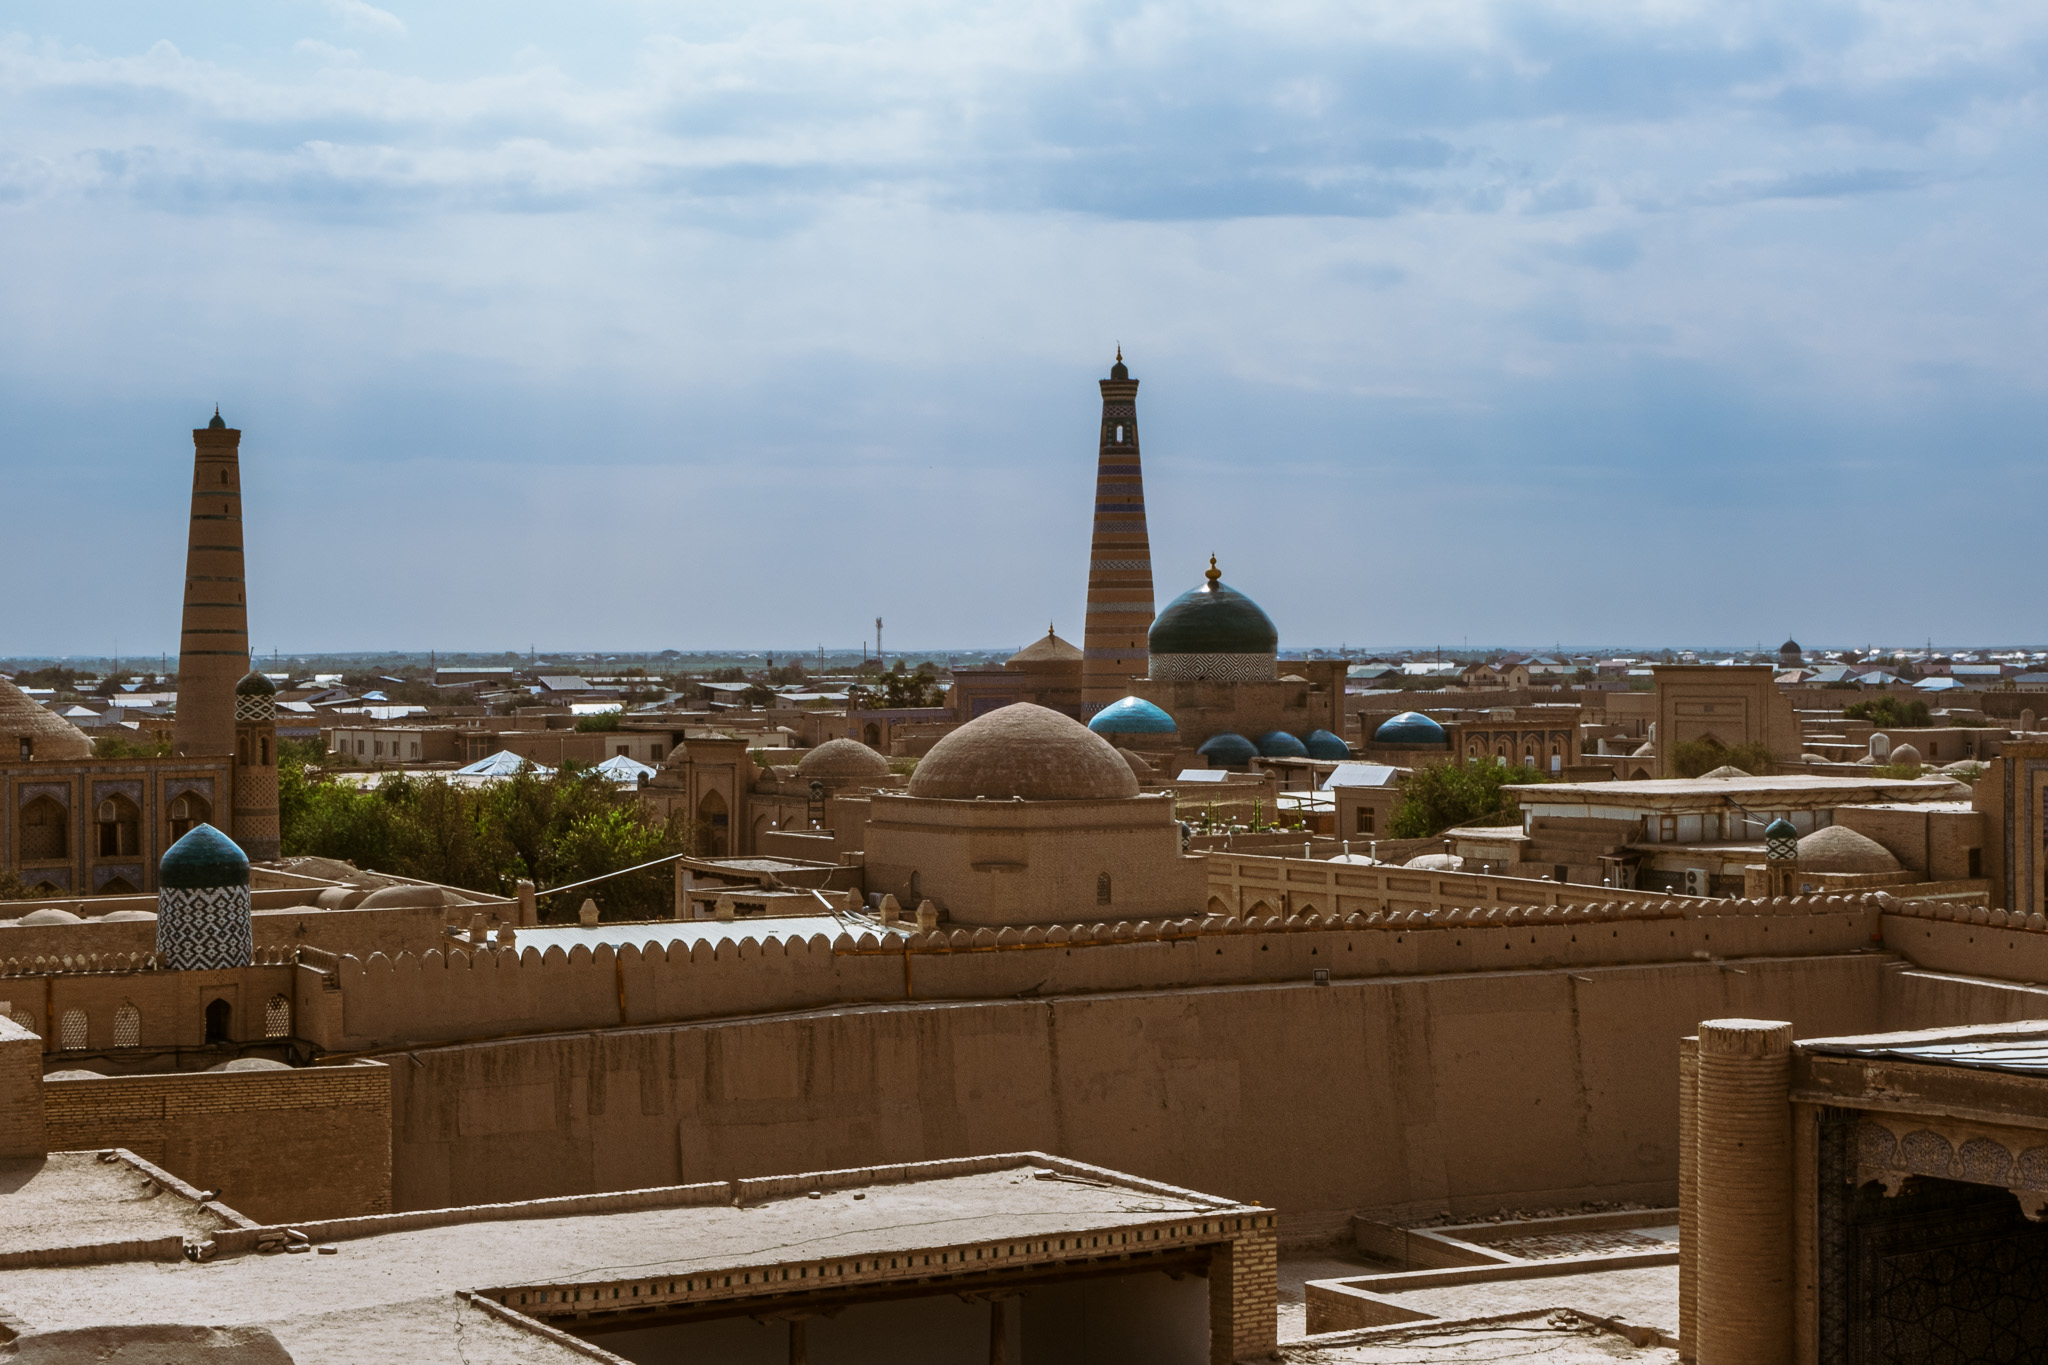 View over the Old Town in Khiva